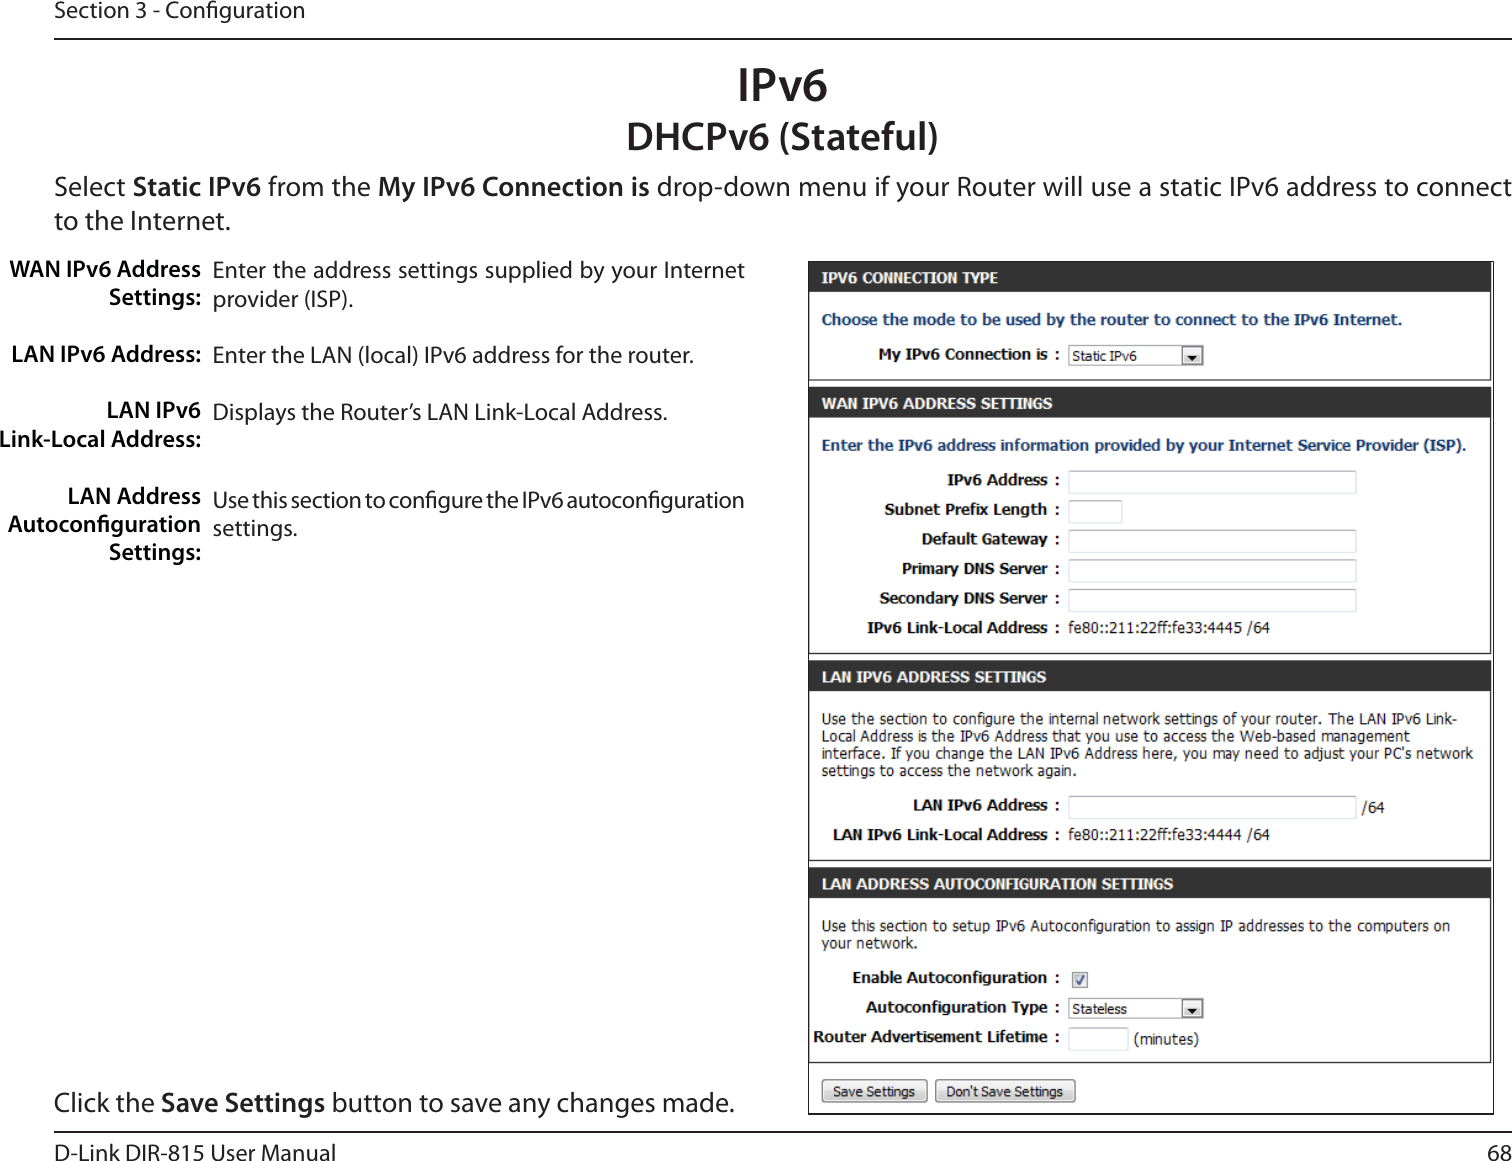 68D-Link DIR-815 User ManualSection 3 - CongurationIPv6DHCPv6 (Stateful)Select Static IPv6 from the My IPv6 Connection is drop-down menu if your Router will use a static IPv6 address to connect to the Internet.Enter the address settings supplied by your Internet provider (ISP). Enter the LAN (local) IPv6 address for the router. Displays the Router’s LAN Link-Local Address.Use this section to congure the IPv6 autoconguration settings.WAN IPv6 Address Settings:LAN IPv6 Address:LAN IPv6  Link-Local Address:LAN Address Autoconguration Settings:Click the Save Settings button to save any changes made.